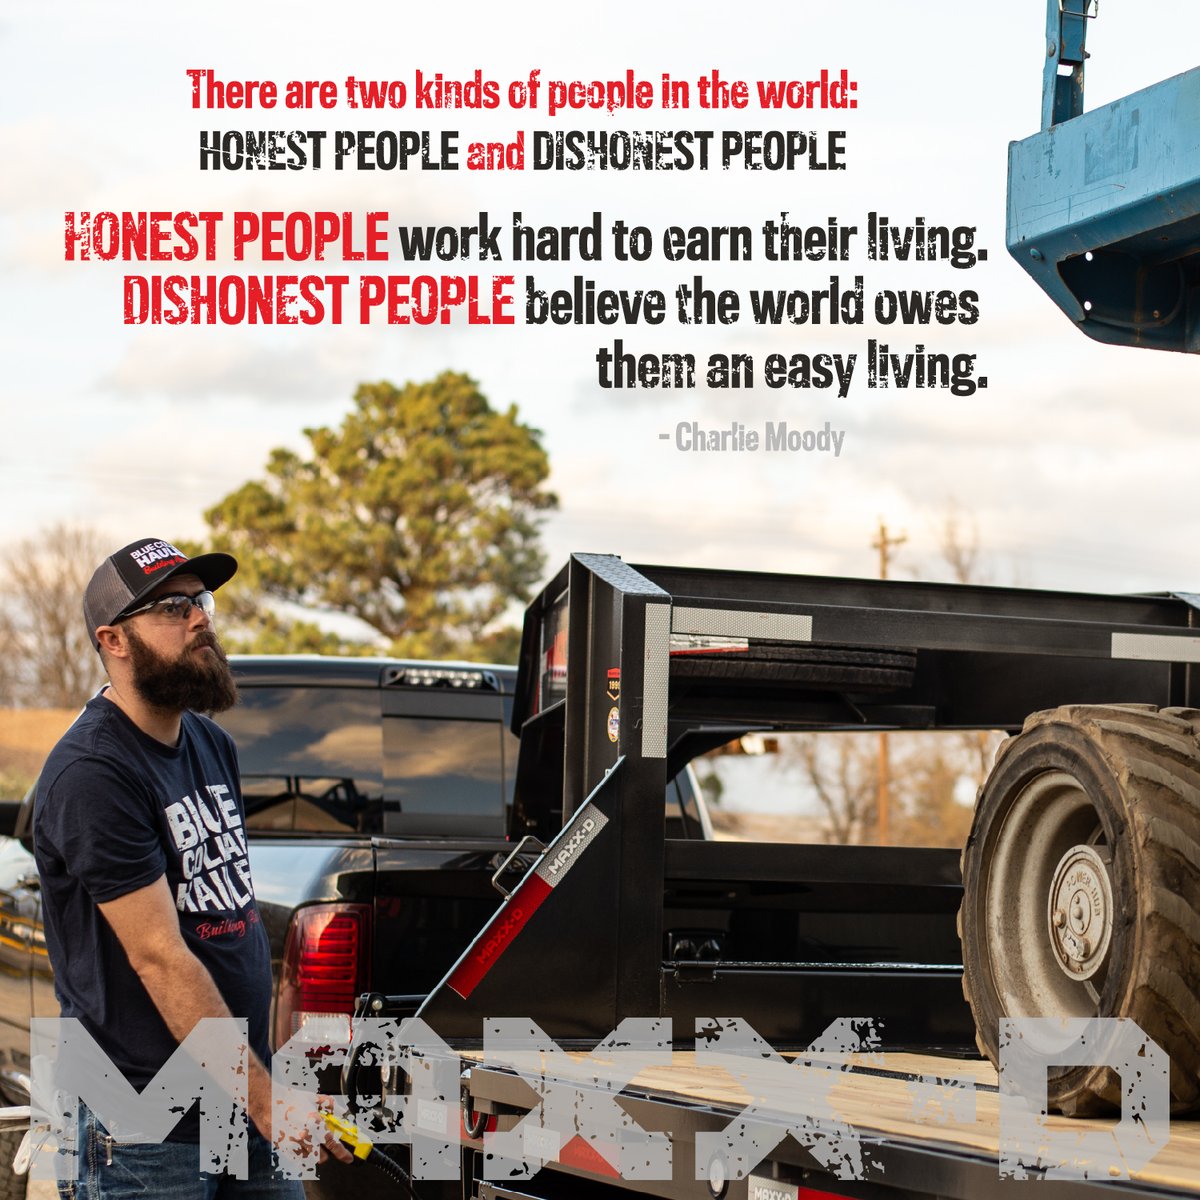 Here's some #mondaymotivation for you hard working #bluecollarhaulers out there!

It's Monday, let's go get some!

#maxxdmonday #motivation #hardworkingpeople #bluecollar #bluecollarftw #bluecollarlife #bluecollarhauler #workhardstayhumble #dreambigworkhard #maxxdtrailers #maxxd